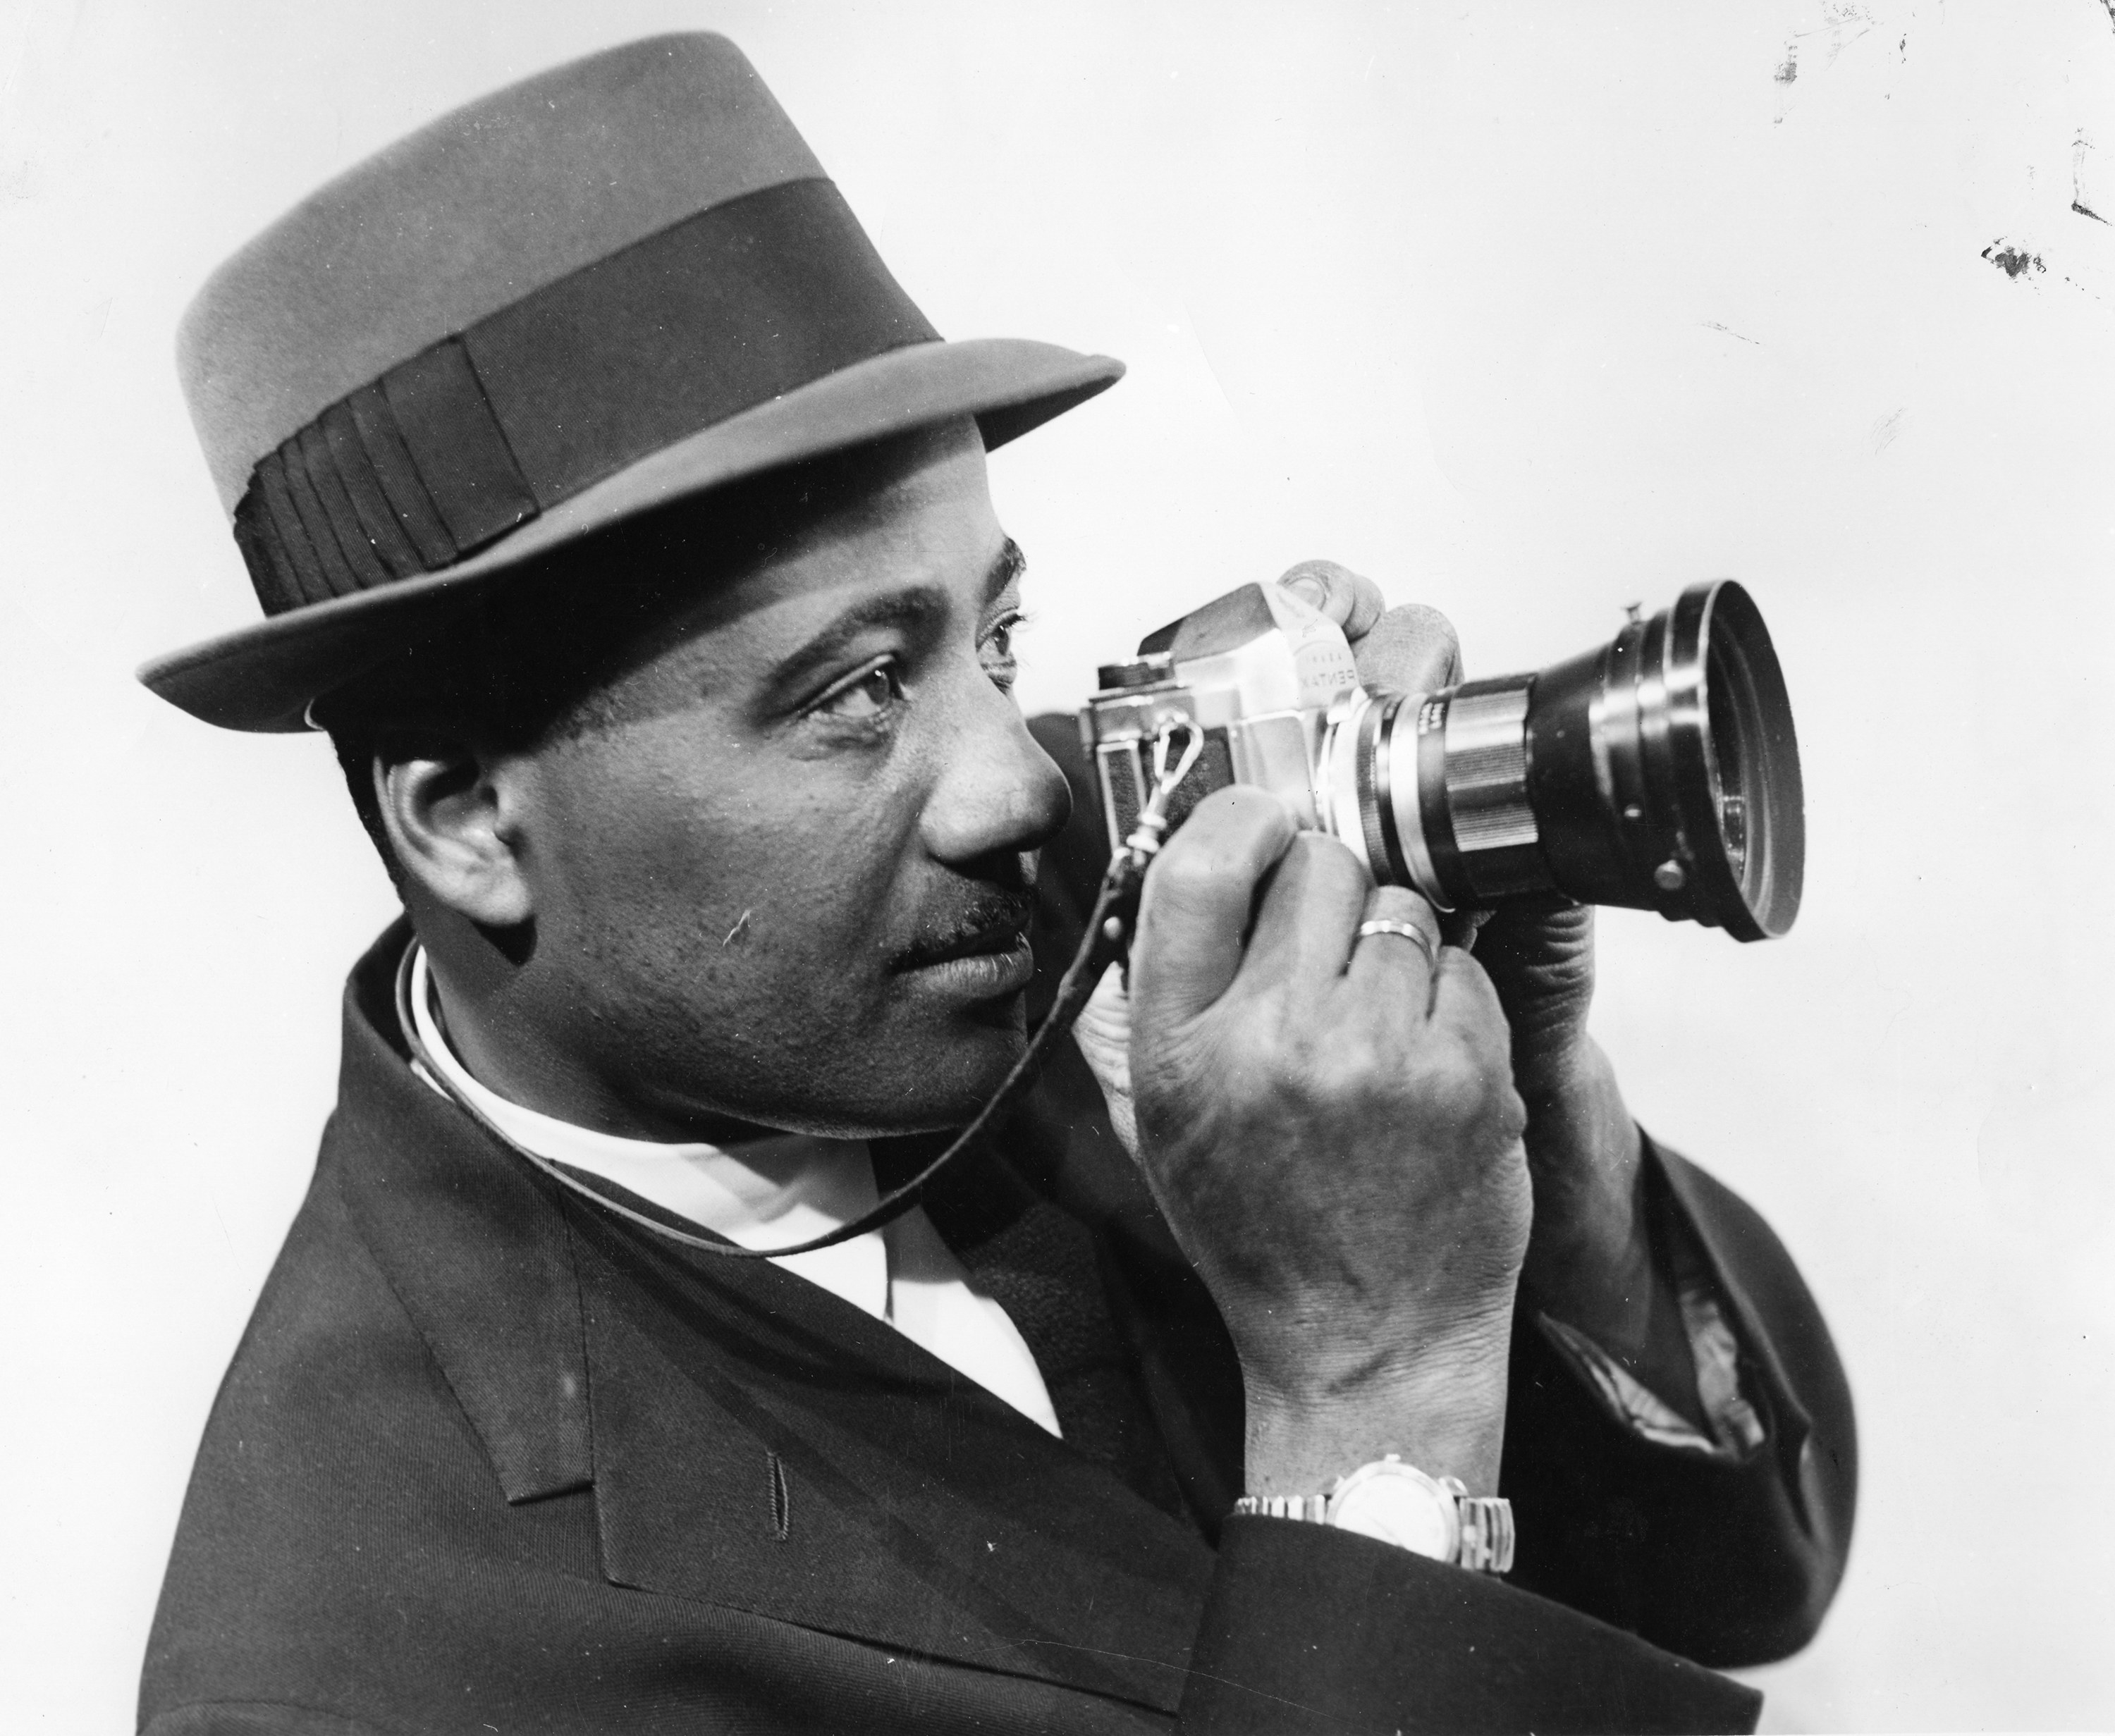 A man in a suit and hat aiming an old film camera